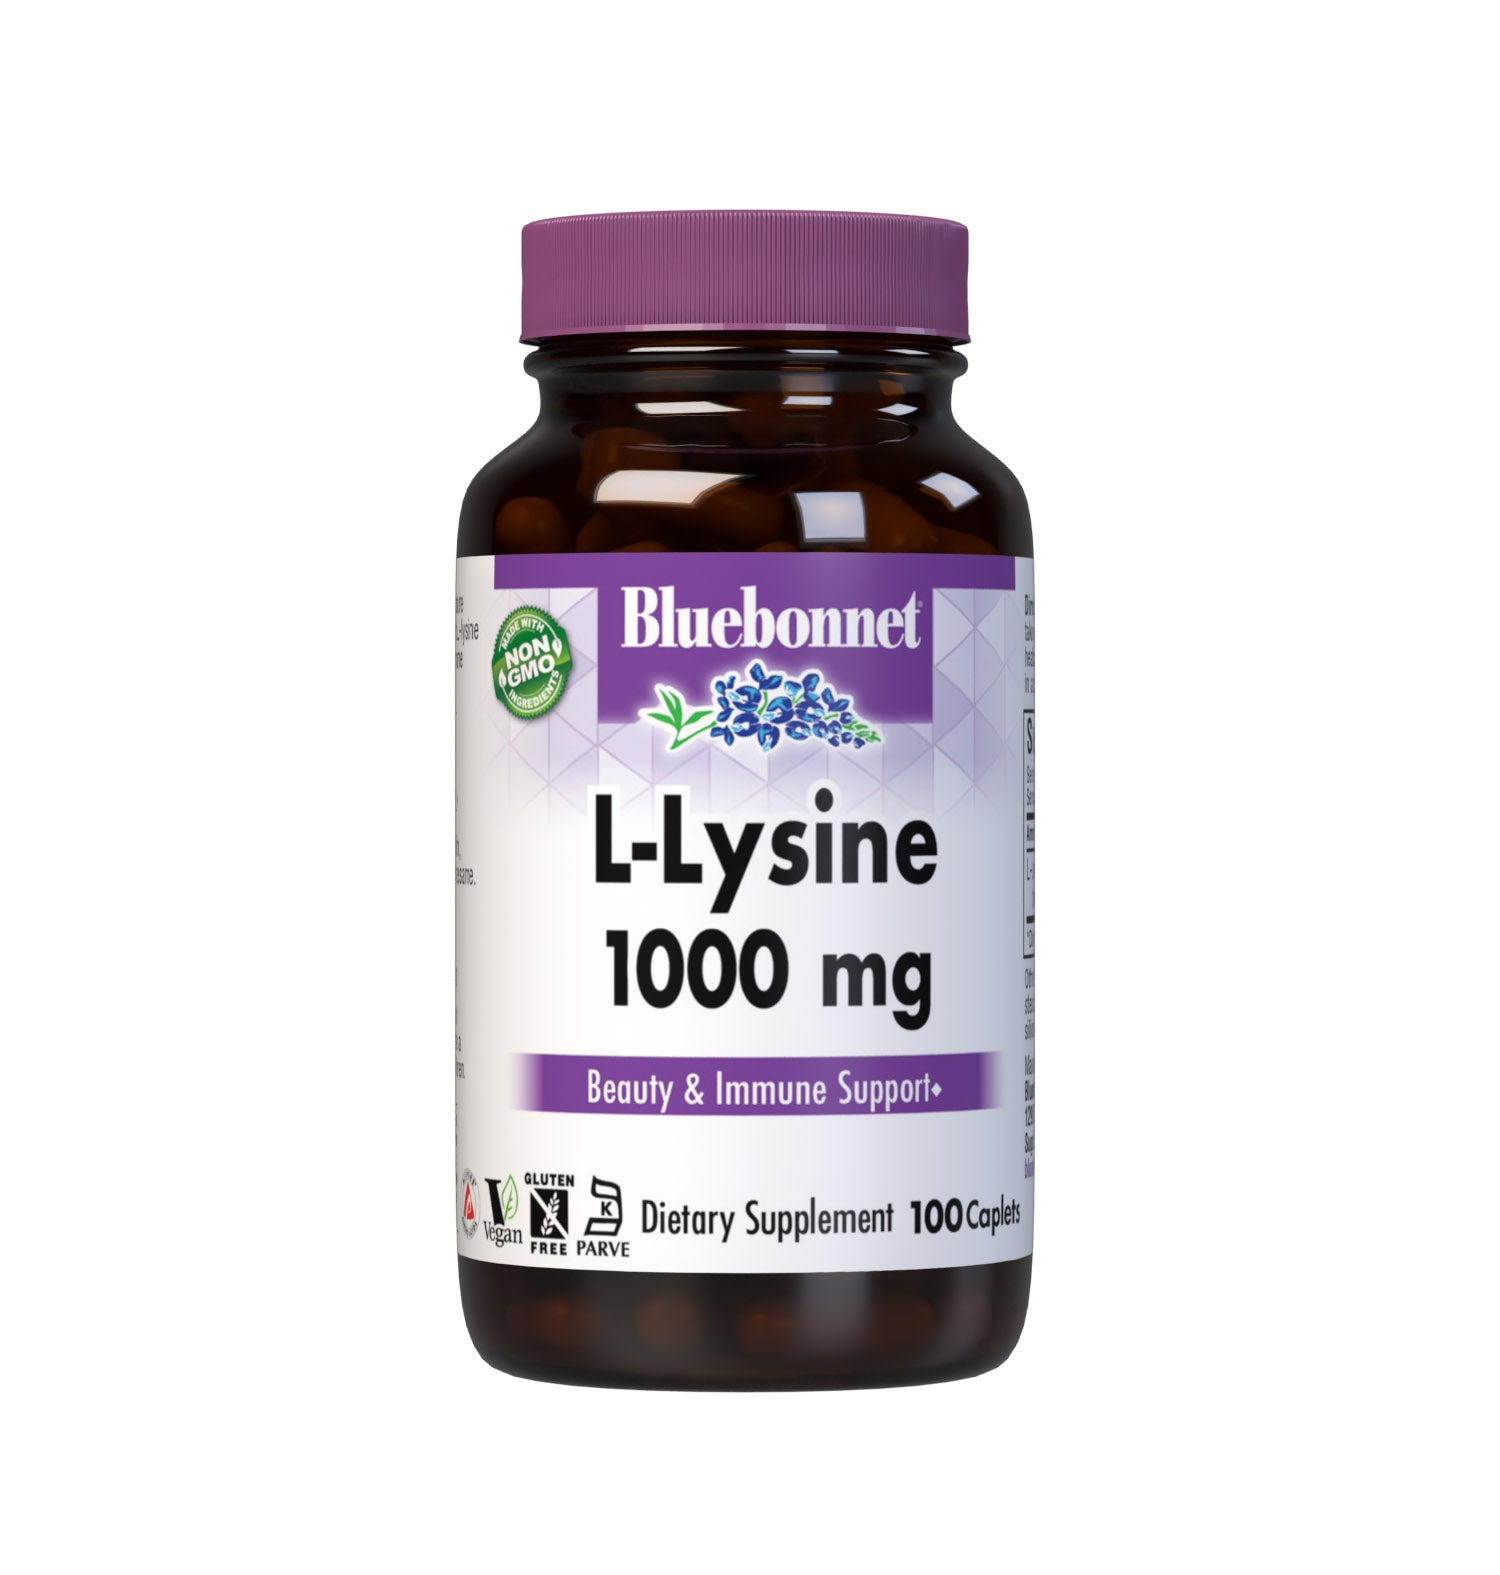 Bluebonnet’s L-Lysine 1000 mg 100 Caplets are formulated with the free-form amino acid L-lysine HCI in its crystalline form from Ajinomoto to help support immune function and collagen synthesis. #size_100 count